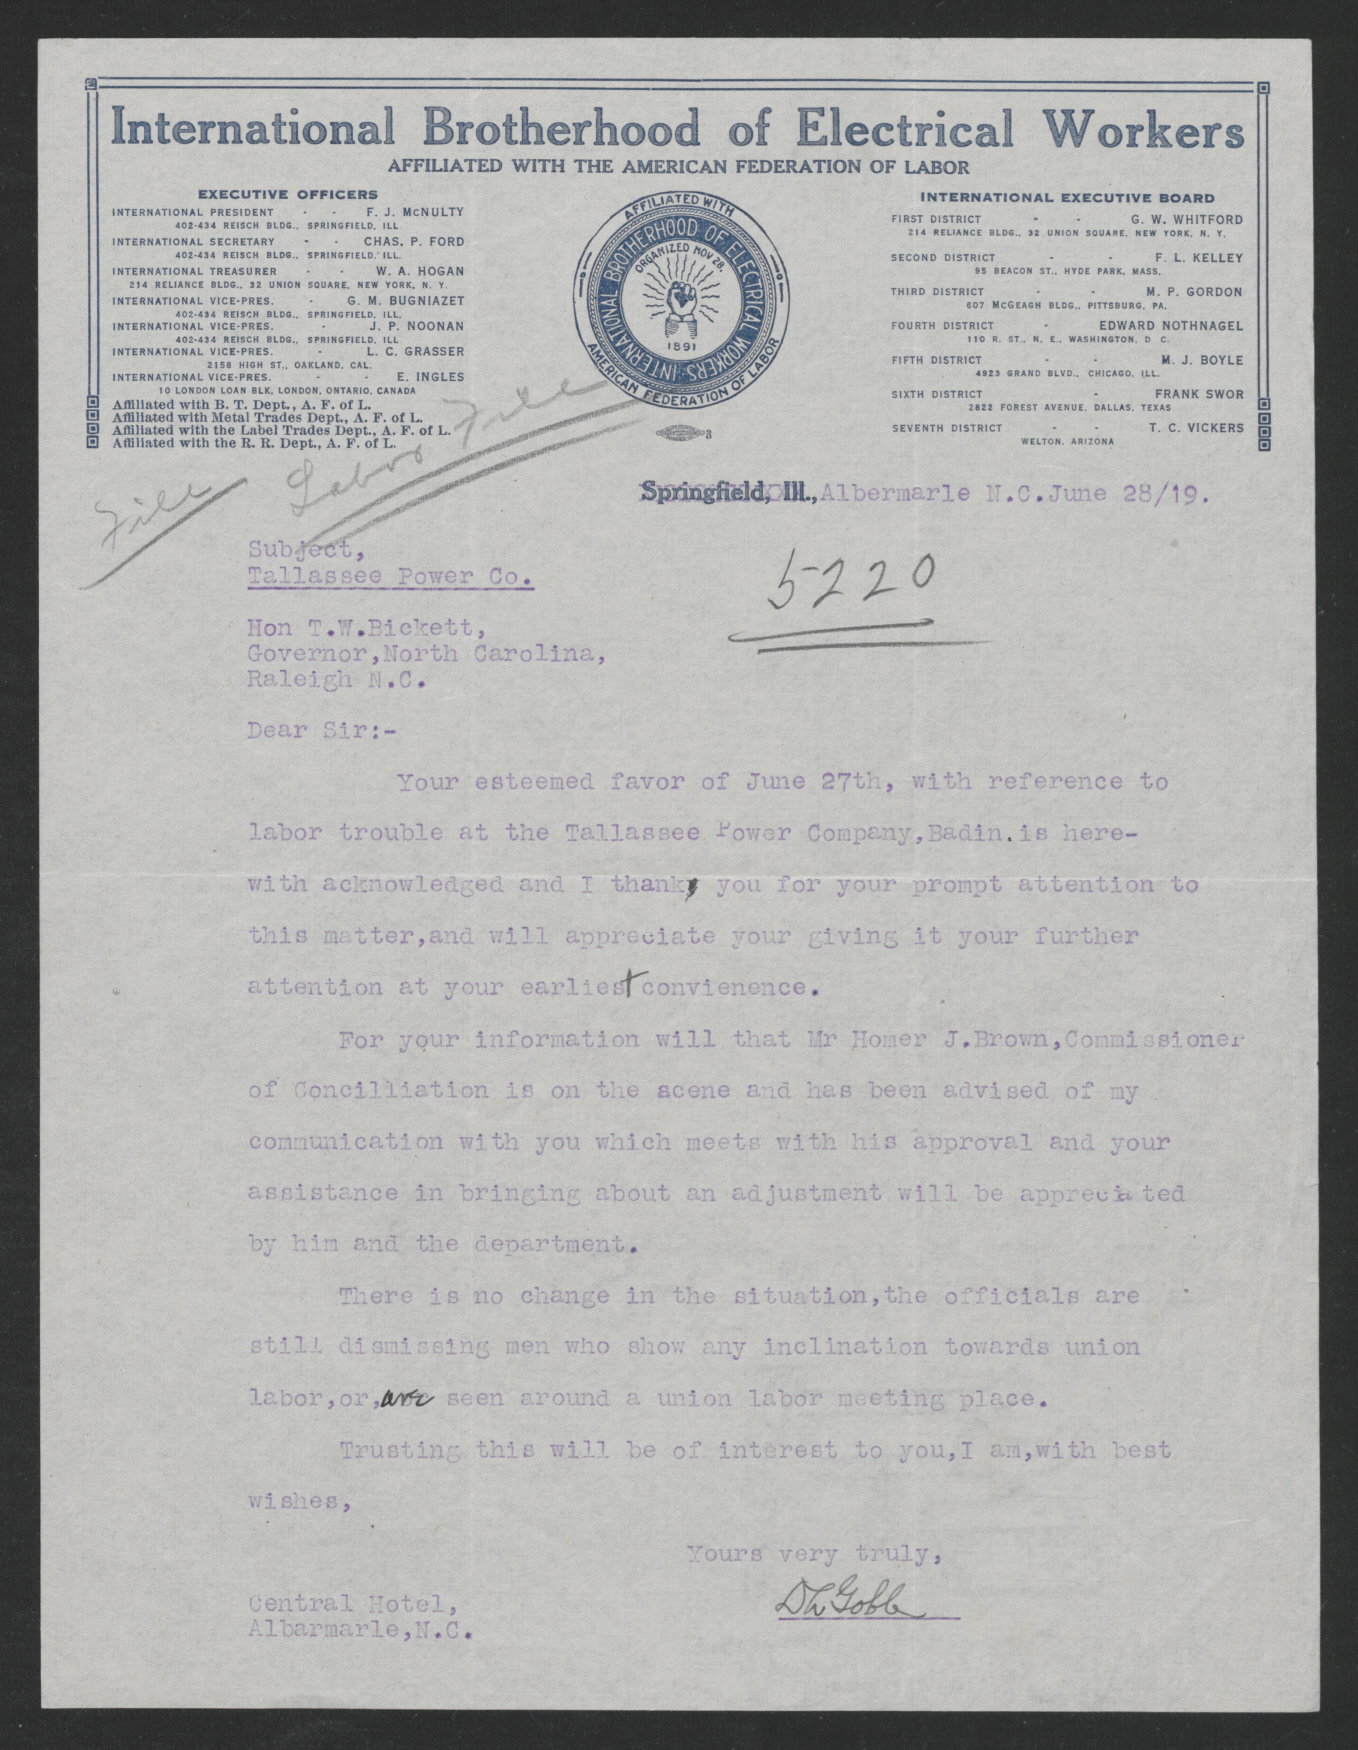 Letter from David L. Goble to Thomas W. Bickett, June 28, 1919